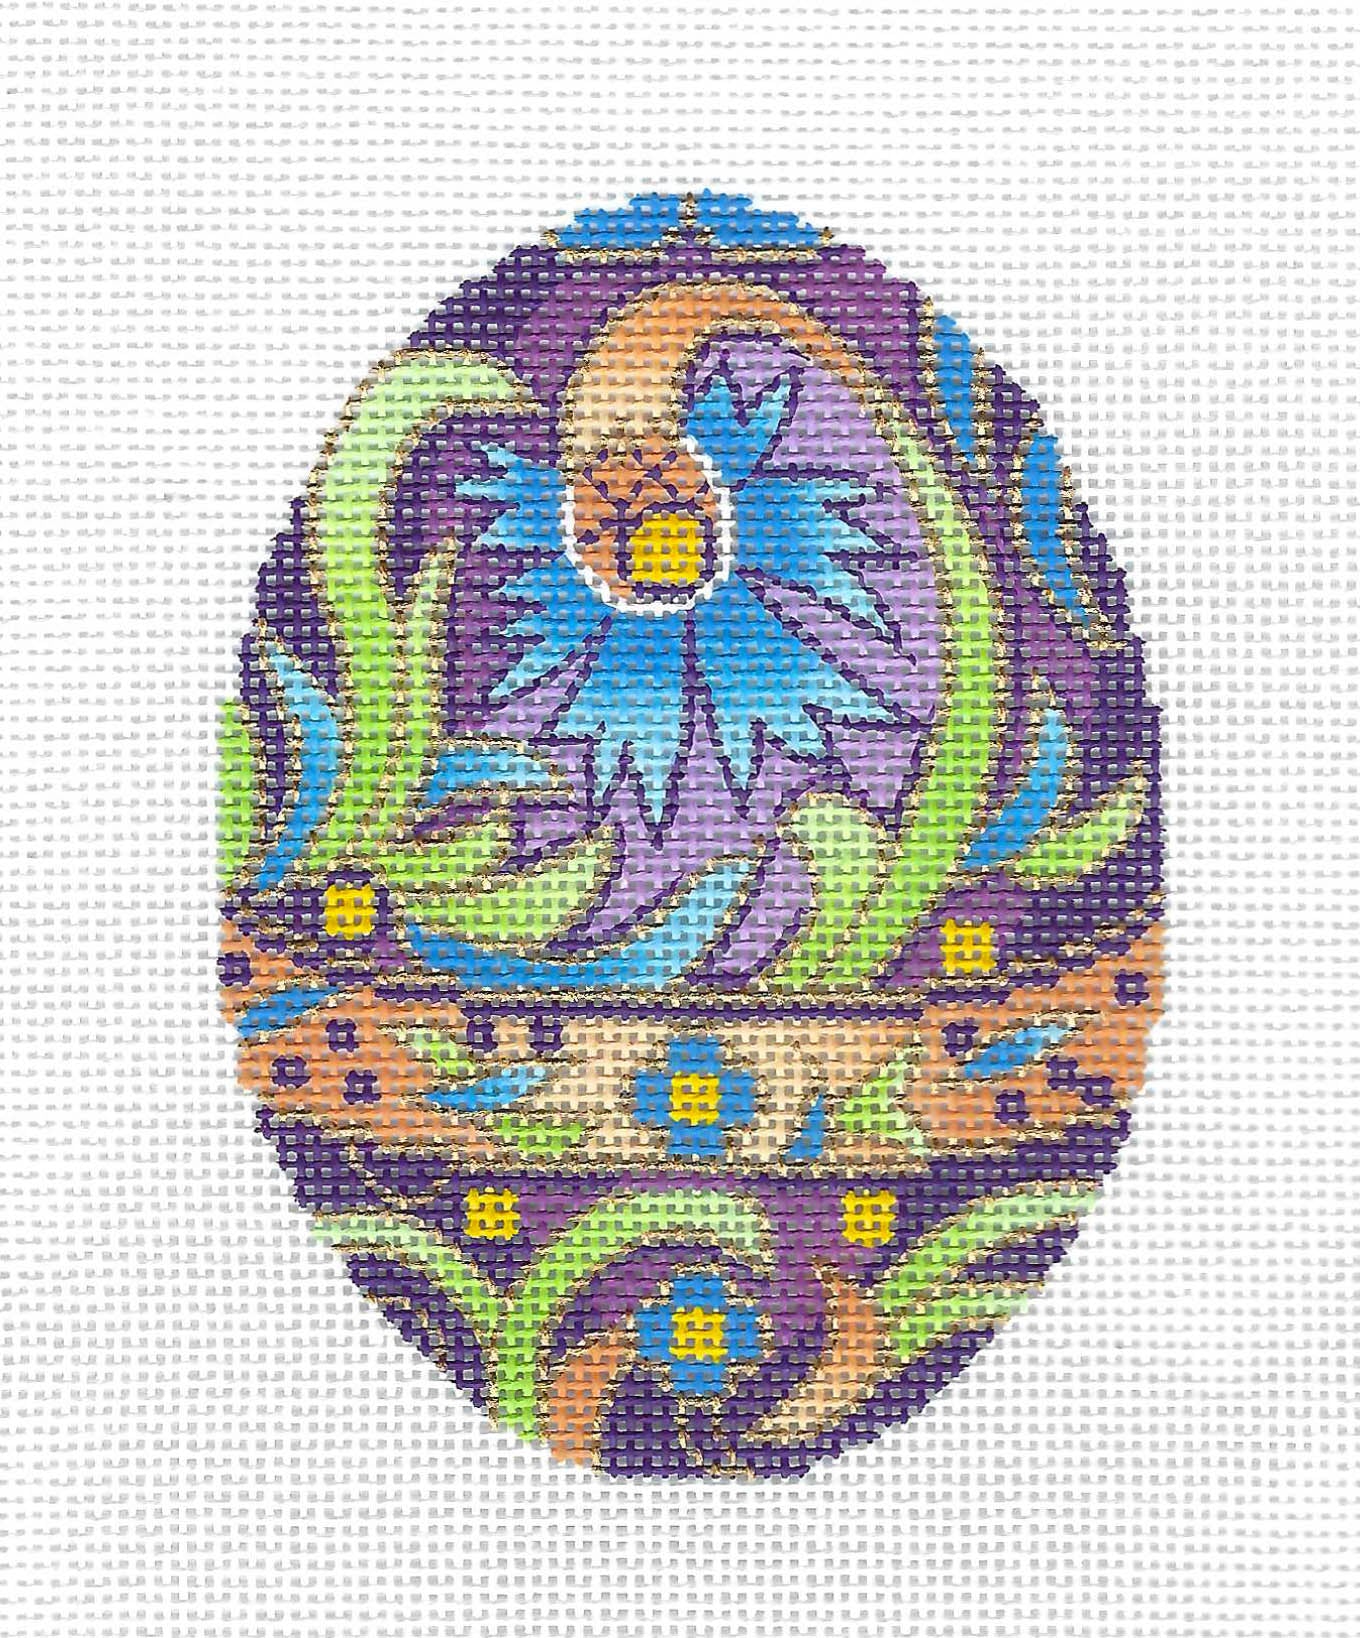 Faberge Egg of the Month ~ FEBRUARY Amethyst Birthstone EGG OF MONTH handpainted 18 mesh Needlepoint Canvas by LEE